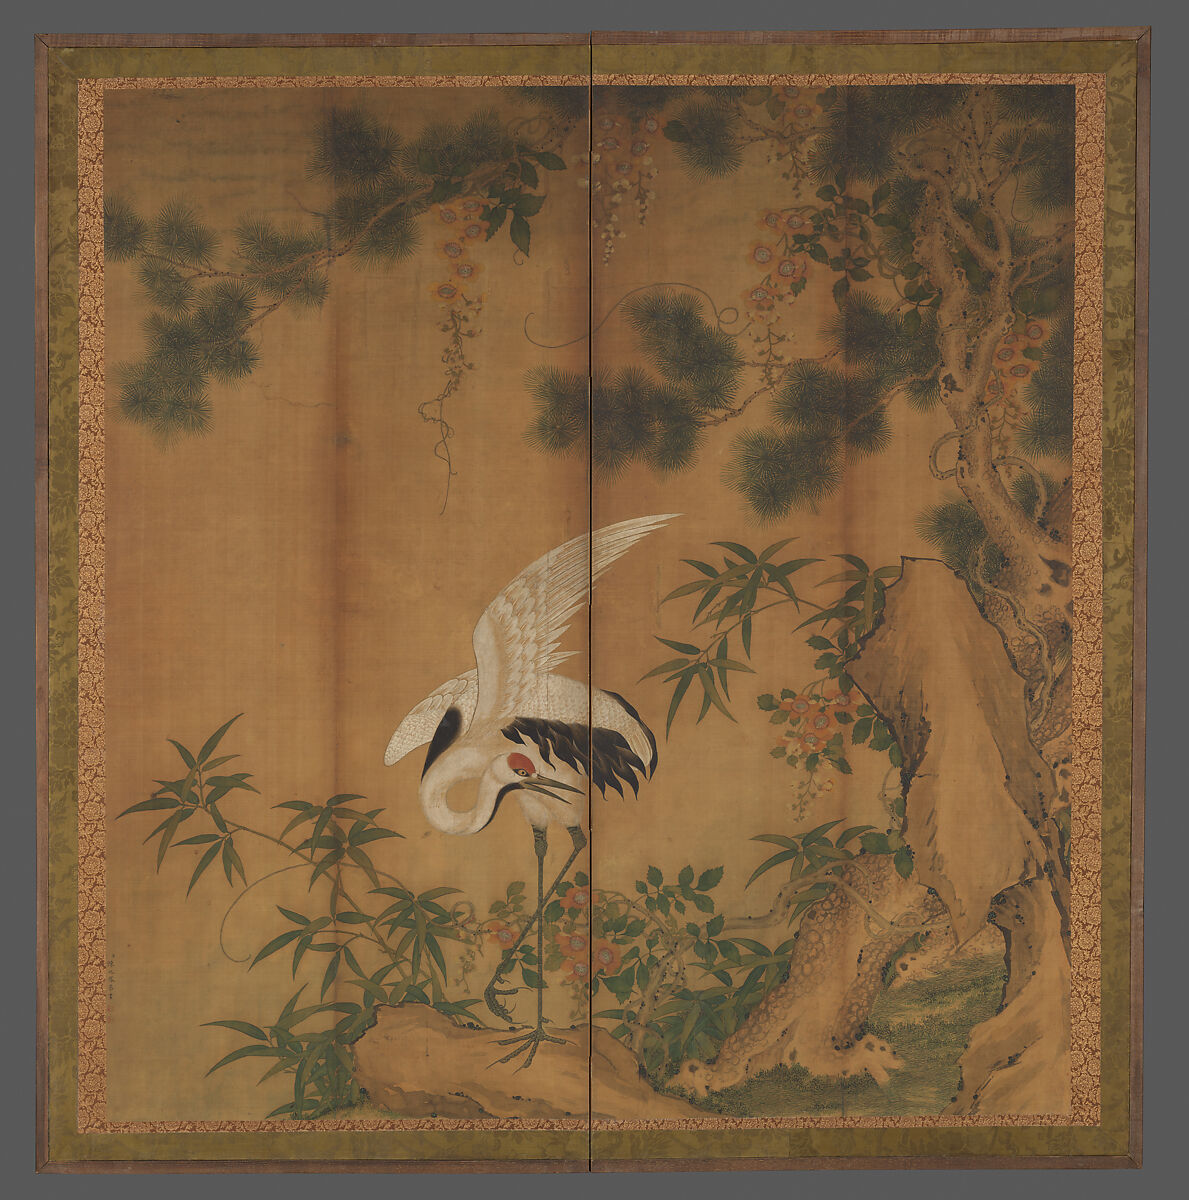 Crane, pine, and rock, Chen Zhaofeng  Chinese, Set of four hanging scrolls mounted on a Japanese bi-fold screen; ink and color on silk, China